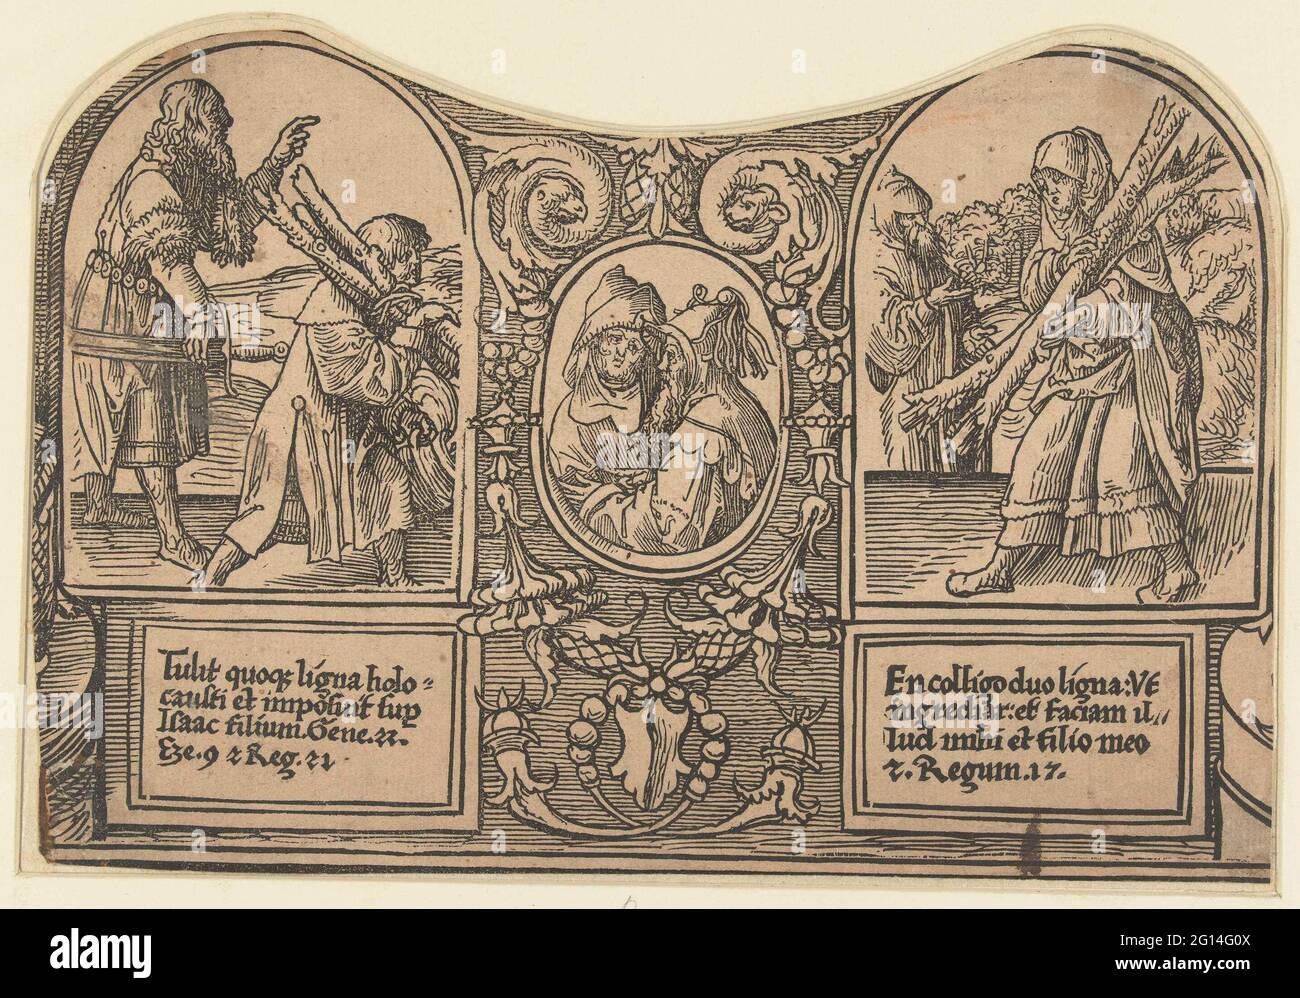 Abraham with Isaac and the widow of Zarfath; The round passion. Lower part of a leaf, from series of twelve prints. Printed of multiple blocks. Two scenes from the Old Testament, Cross Behaves Prefigurations: Left Abraham with Isaac that carries the sacrifice, with references to Bible texts under, right Elijah and the widow of Zarfath that trokehout carries, with references to Bible texts. Two prophets in the middle. Stock Photo